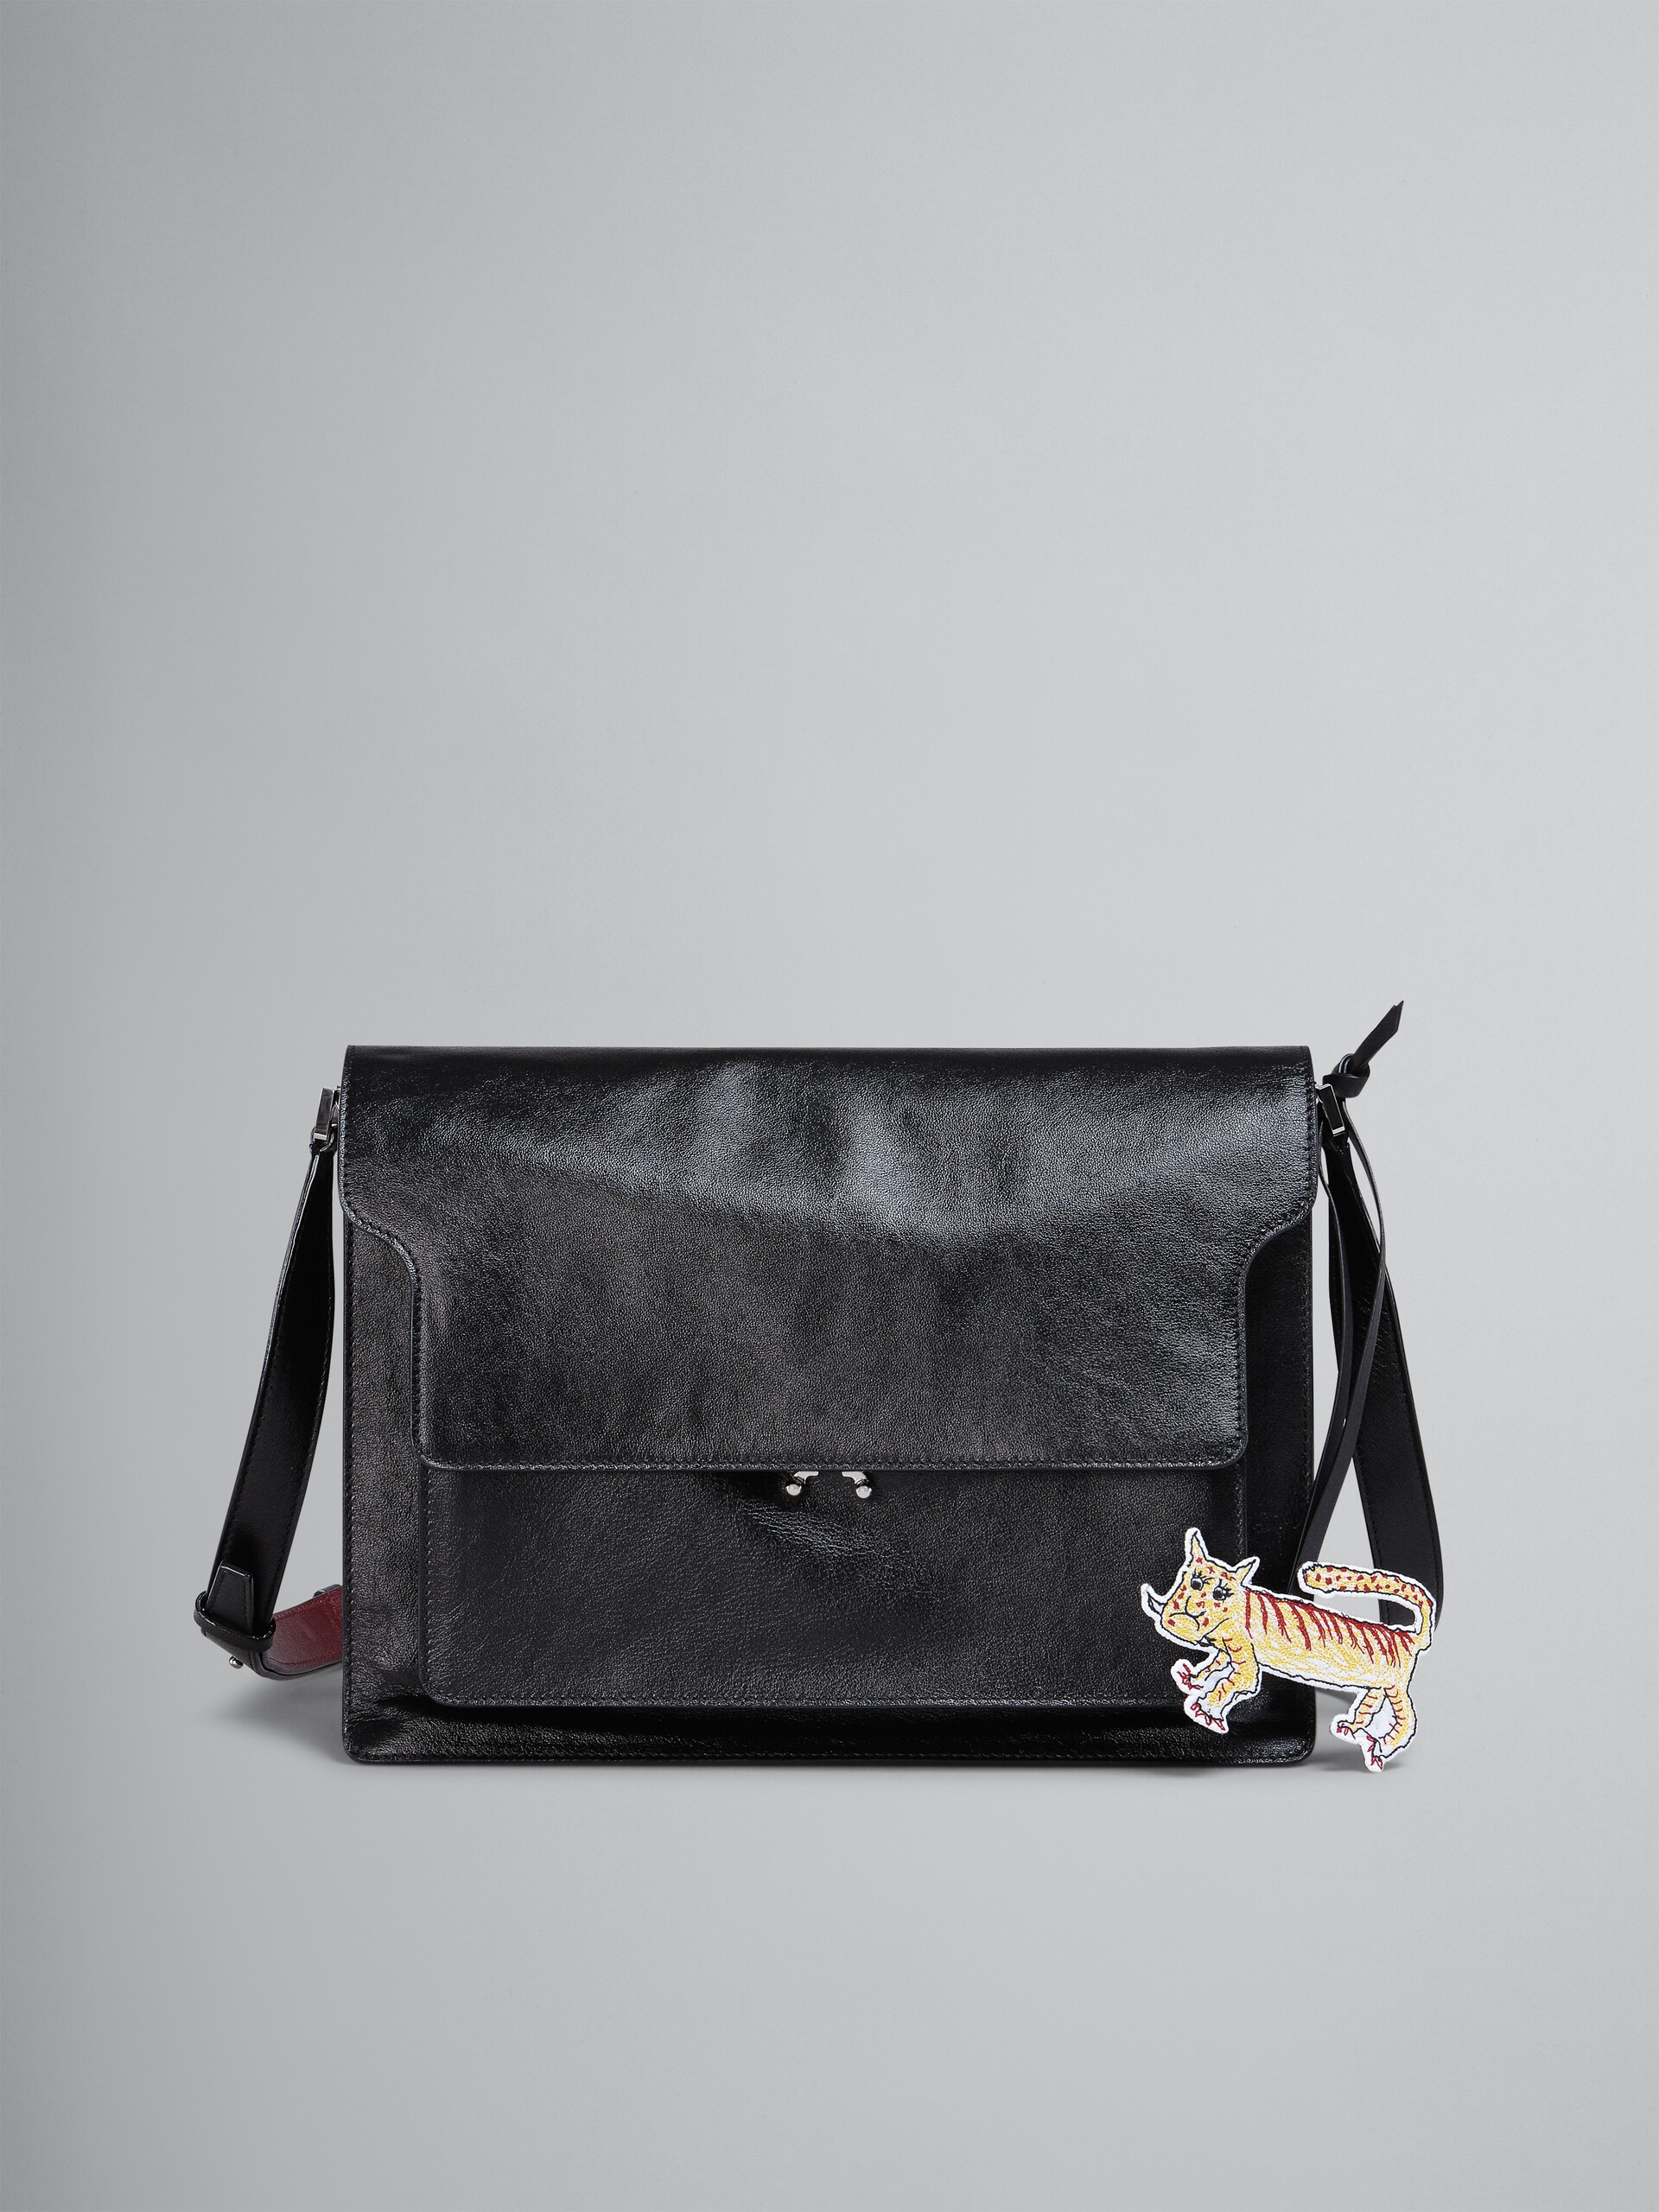 TRUNK SOFT bag in black leather and naif tiger print - Shoulder Bags - Image 1